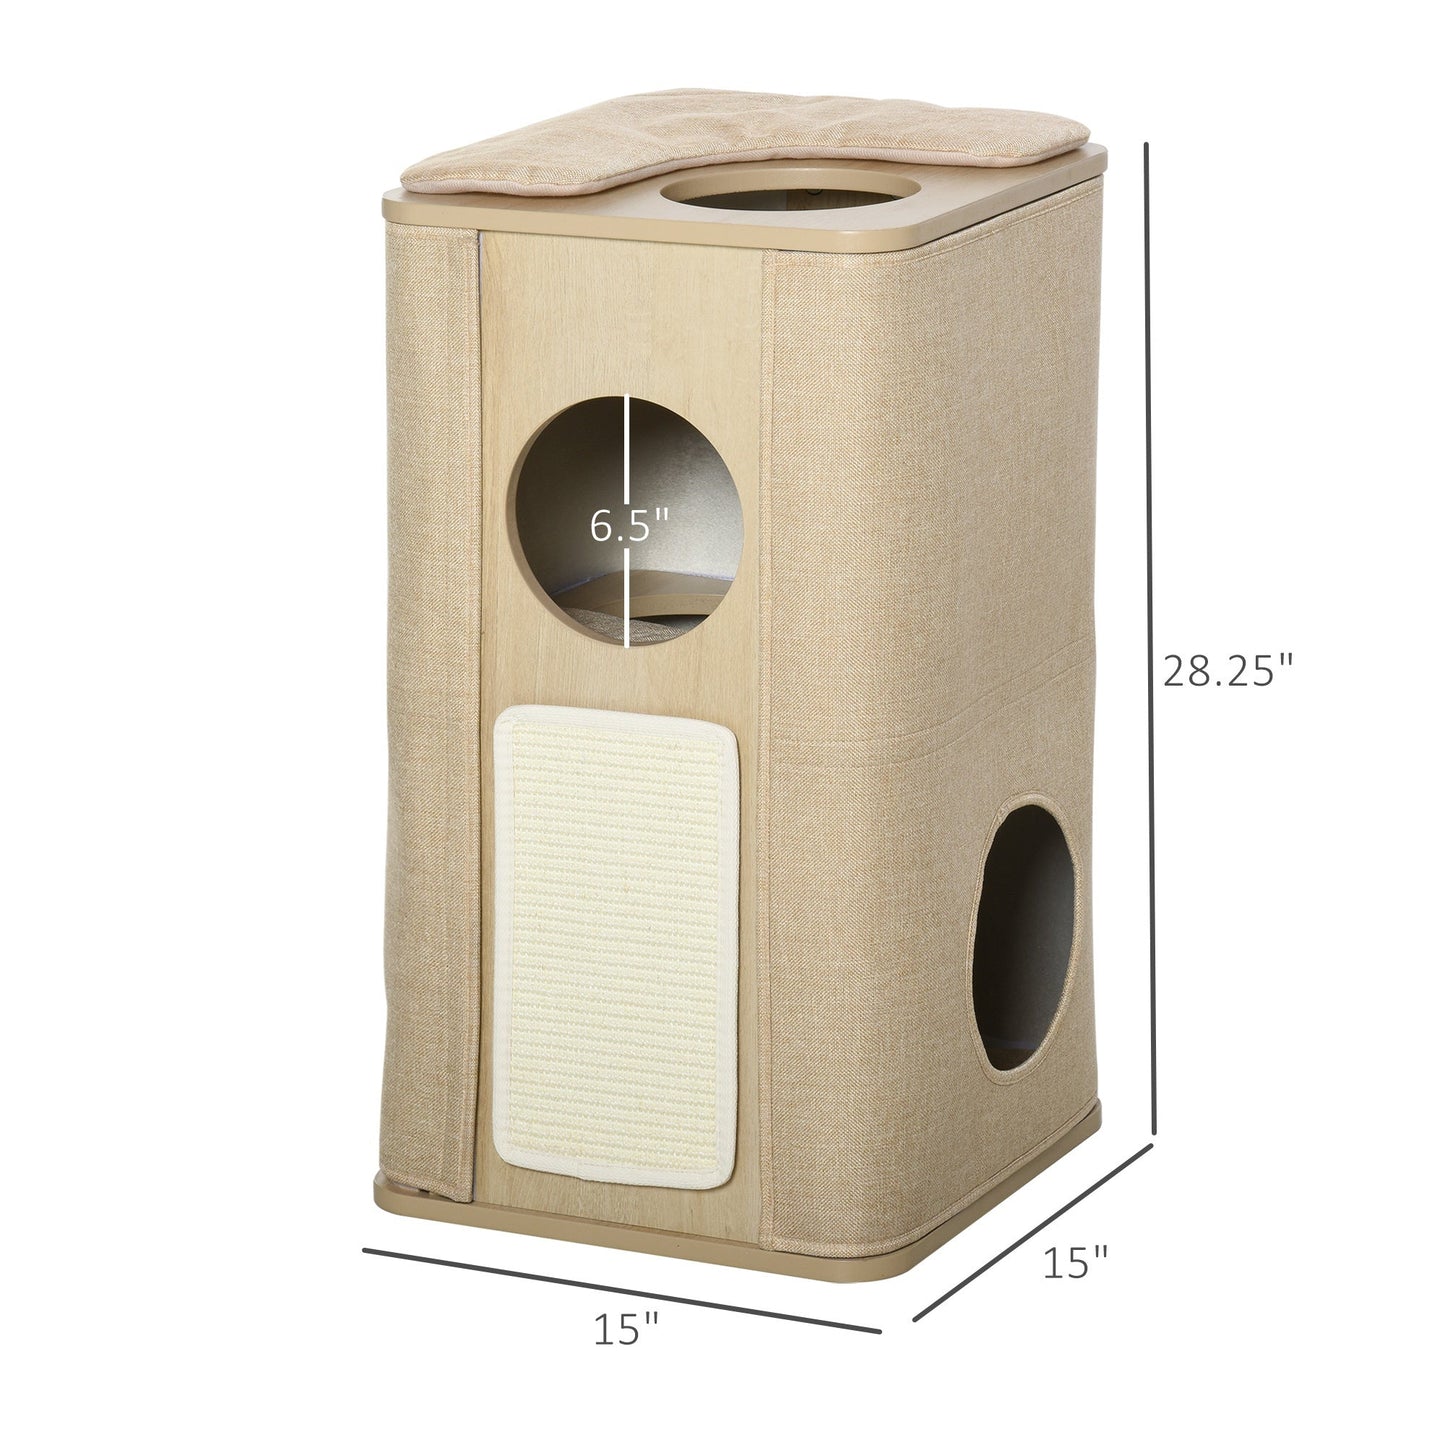 -PawHut Wooden Cat Condo 3 Story Kitten Tree House Barrel Tower Pet Furniture with Perch Removable Cover Soft Cushions Sisal Scratching Carpet Brown - Outdoor Style Company